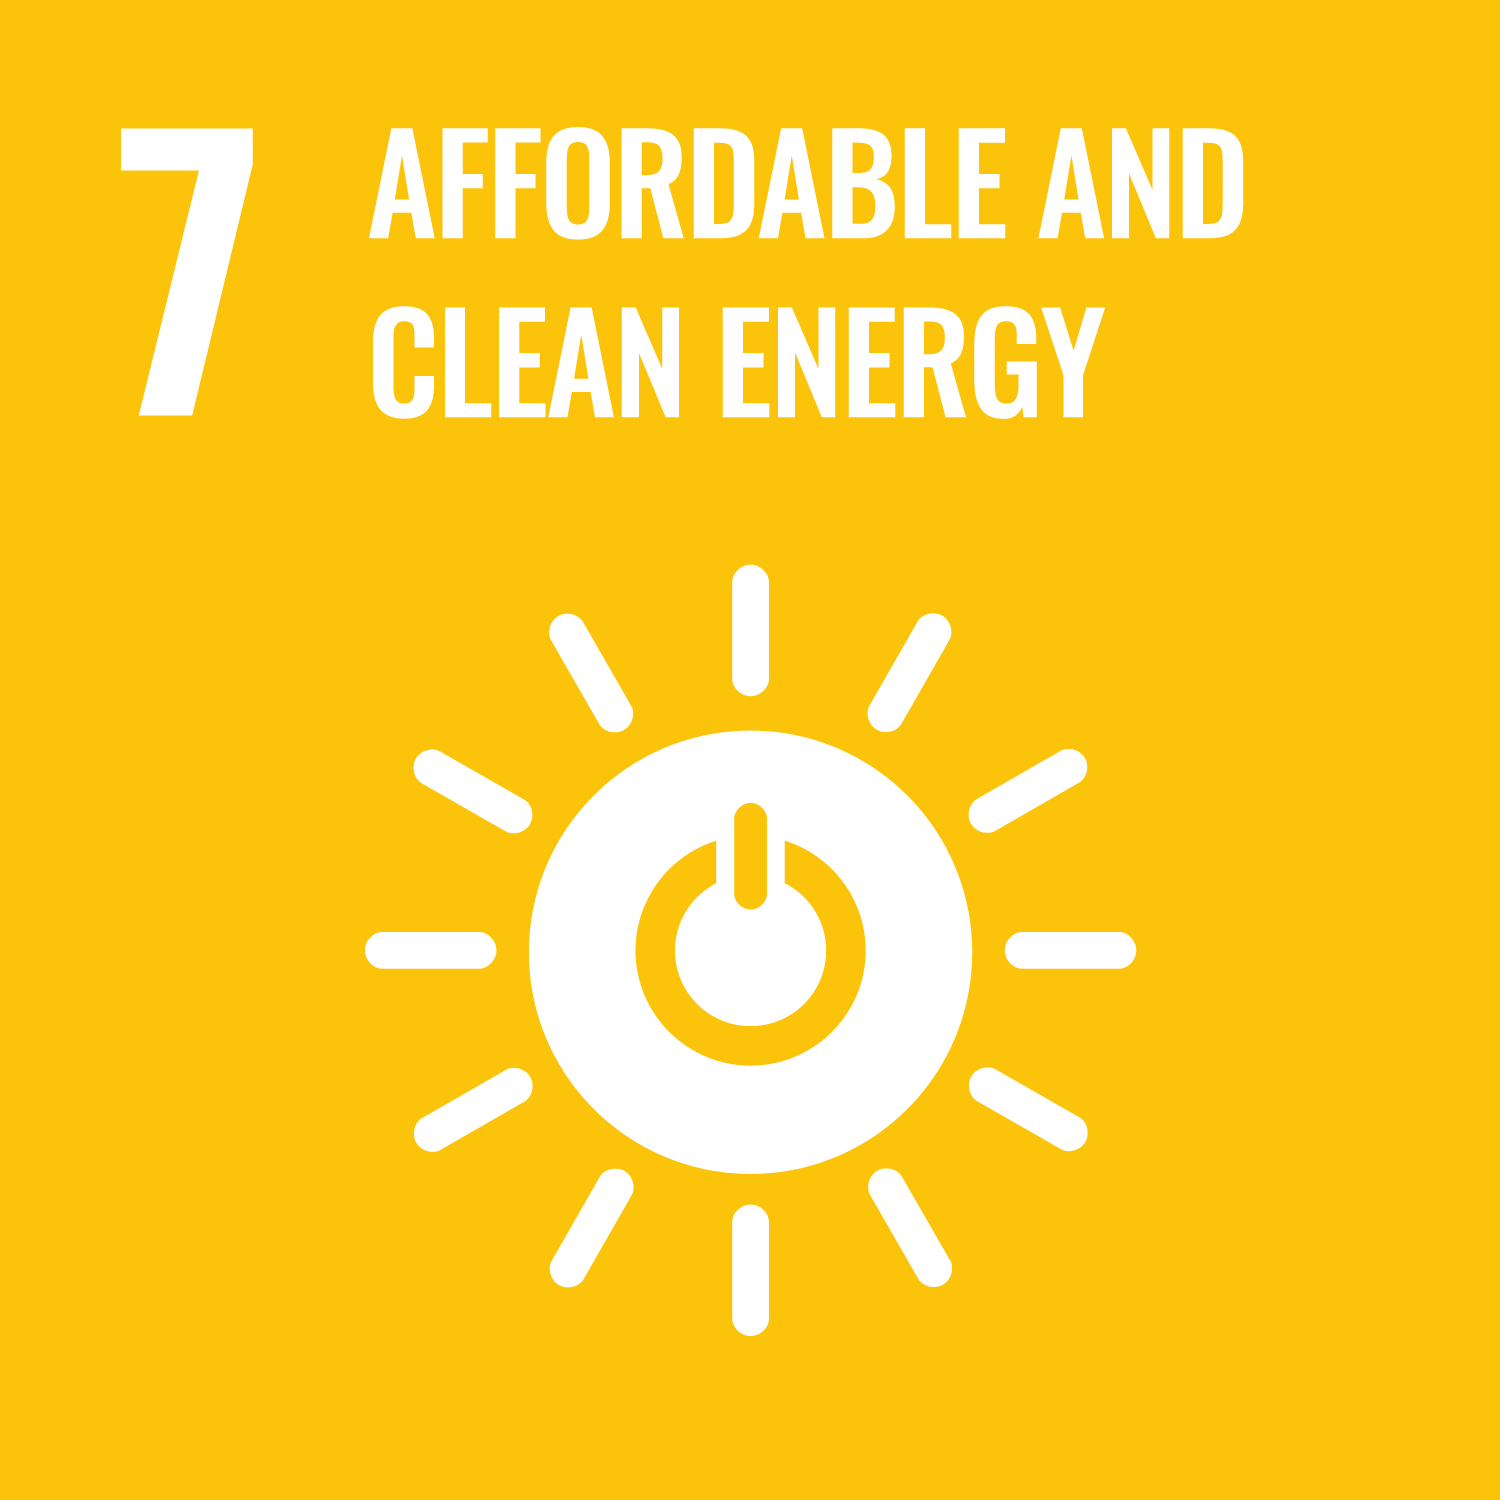 Affordable and Clean Energy SDG Graphic